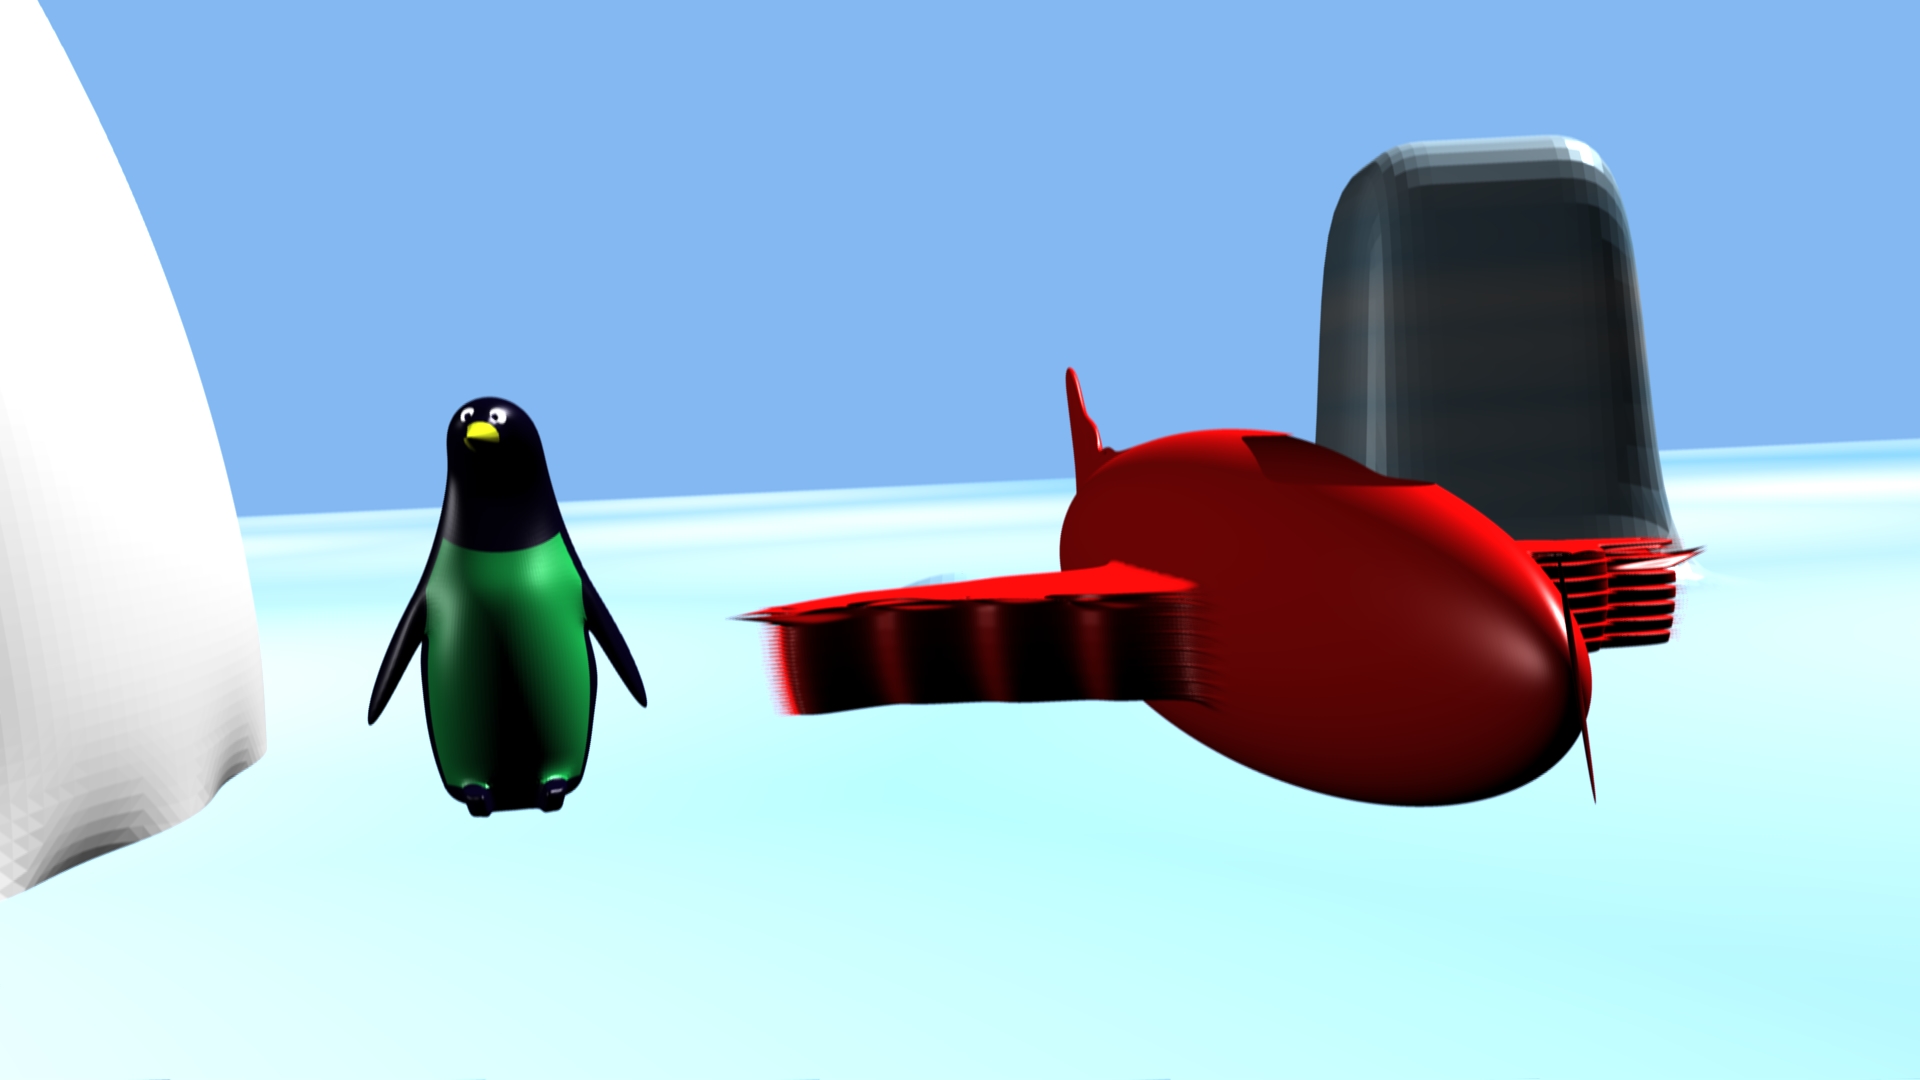 Penguin and his plane